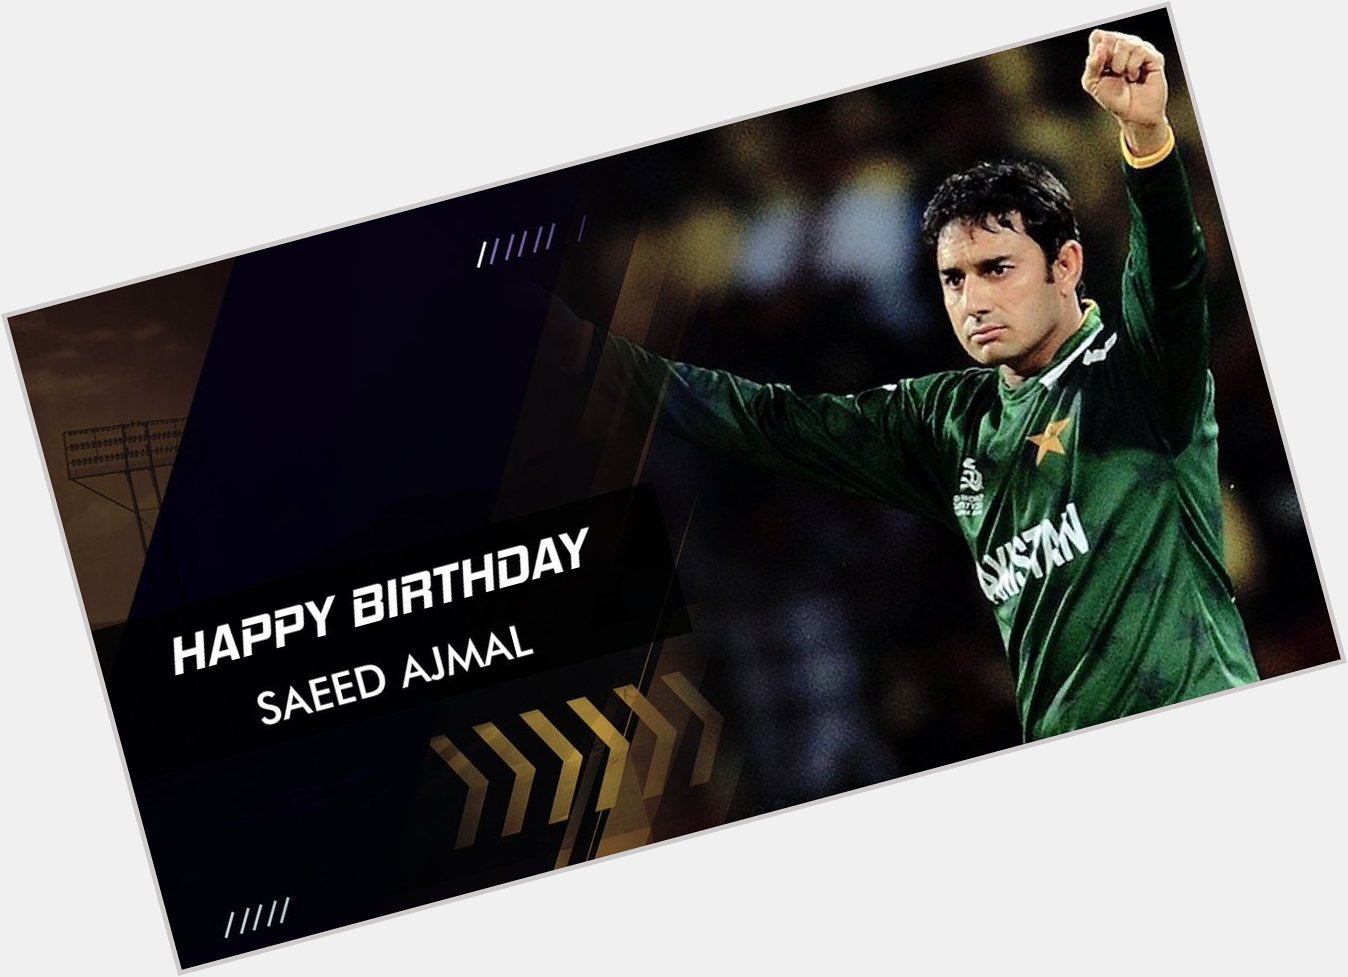 Happy Birthday!! Saeed Ajmal

Former Pakistani Right-Arm Off-Spin Bowler 